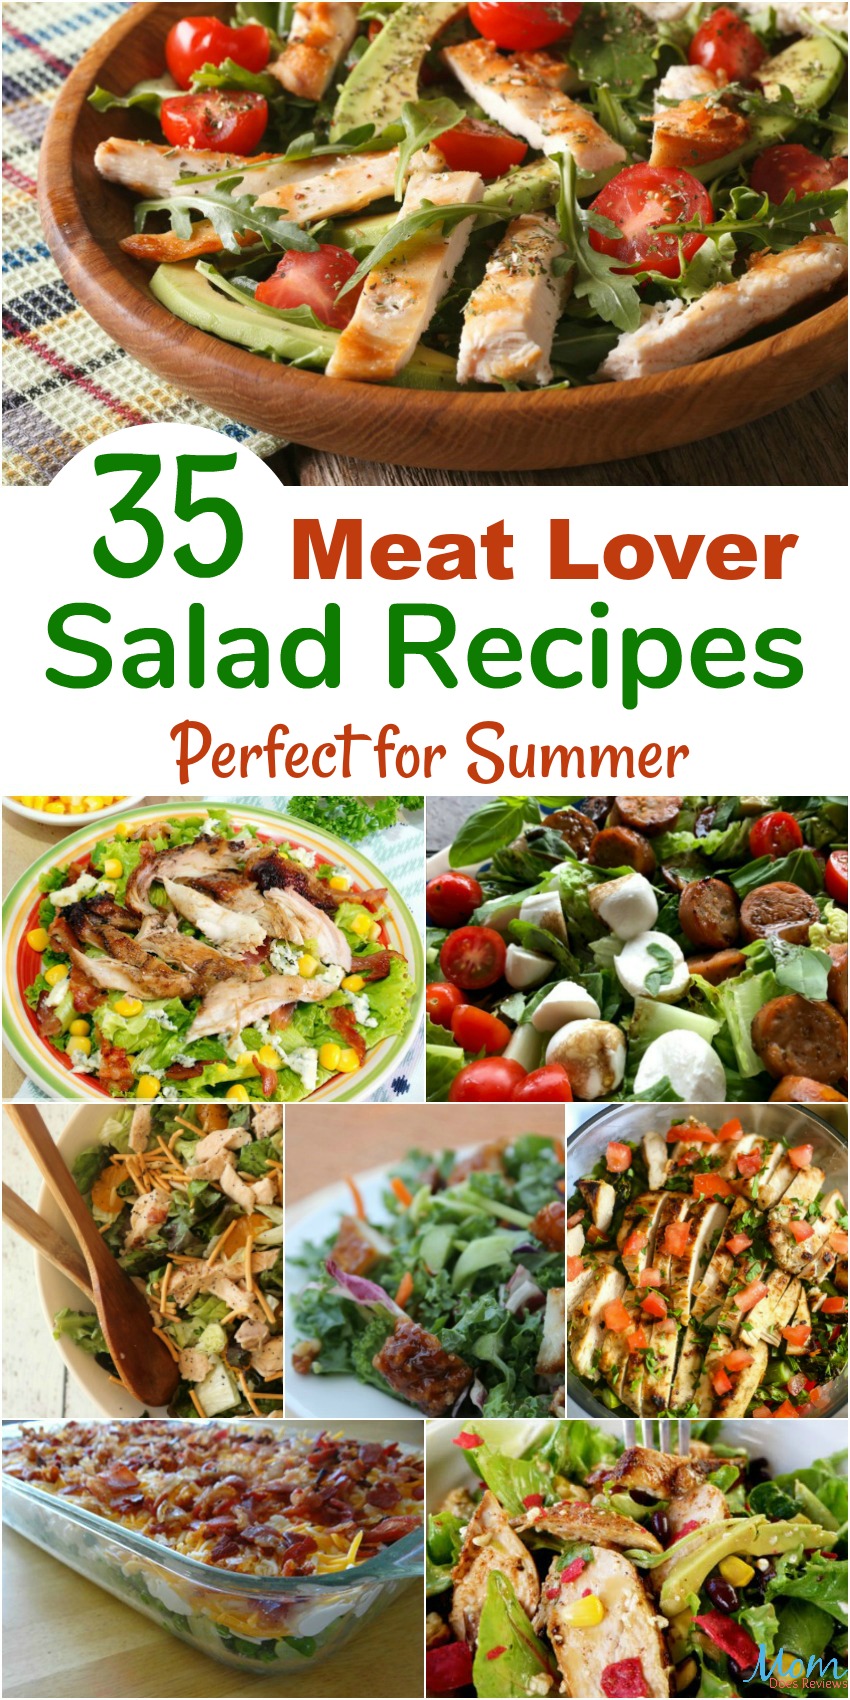 35 Meat Lover Salad Recipes Perfect for Summer